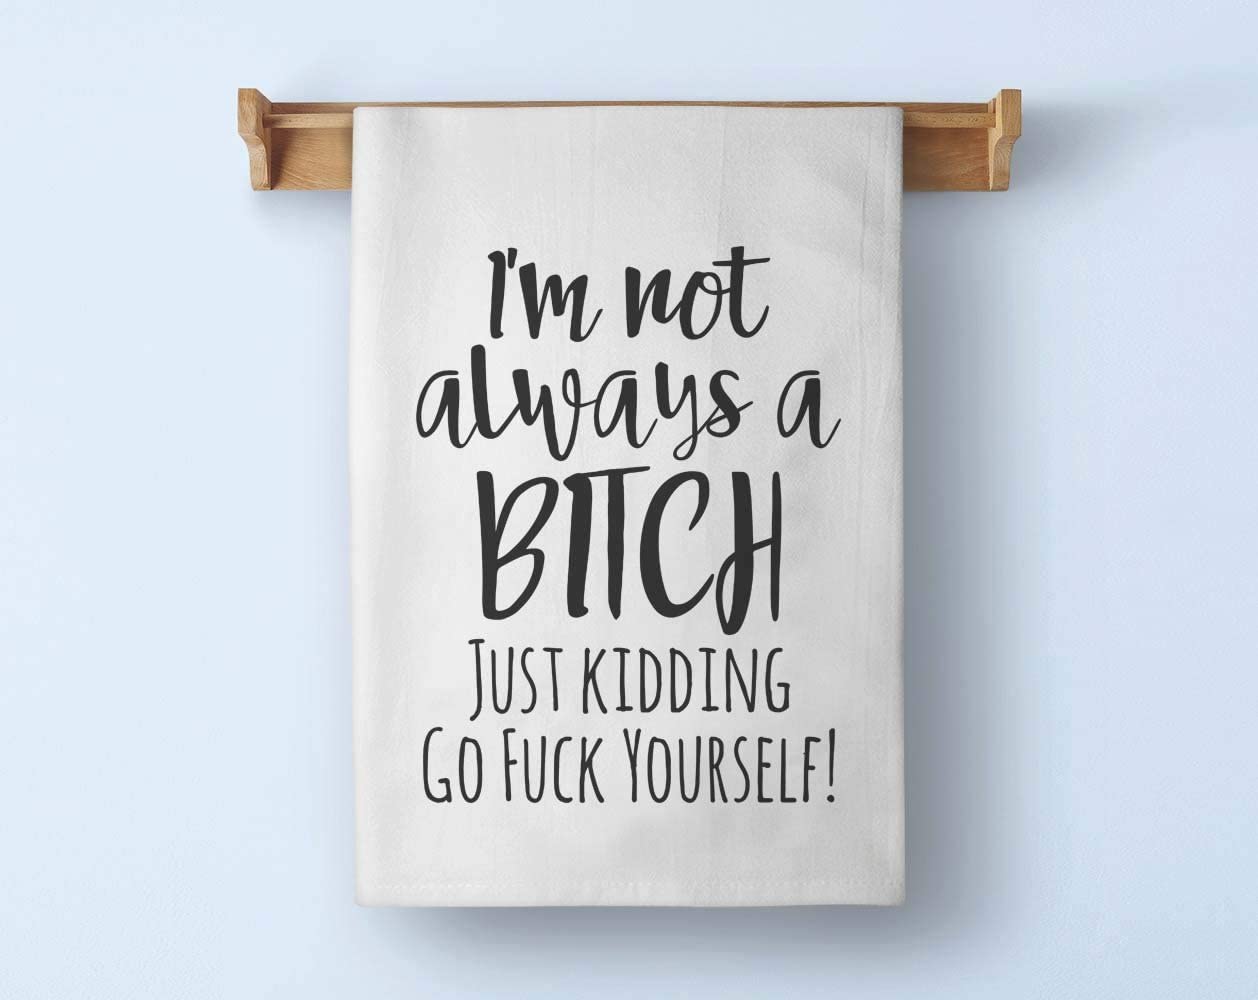 Honey Dew Gifts Funny Inappropriate Kitchen Towels, I'm Not Always a Bitch Flour Sack Towel, 27 inch by 27 inch, 100% Cotton, Highly Absorbent, Multi-Purpose Kitchen Dish Towel